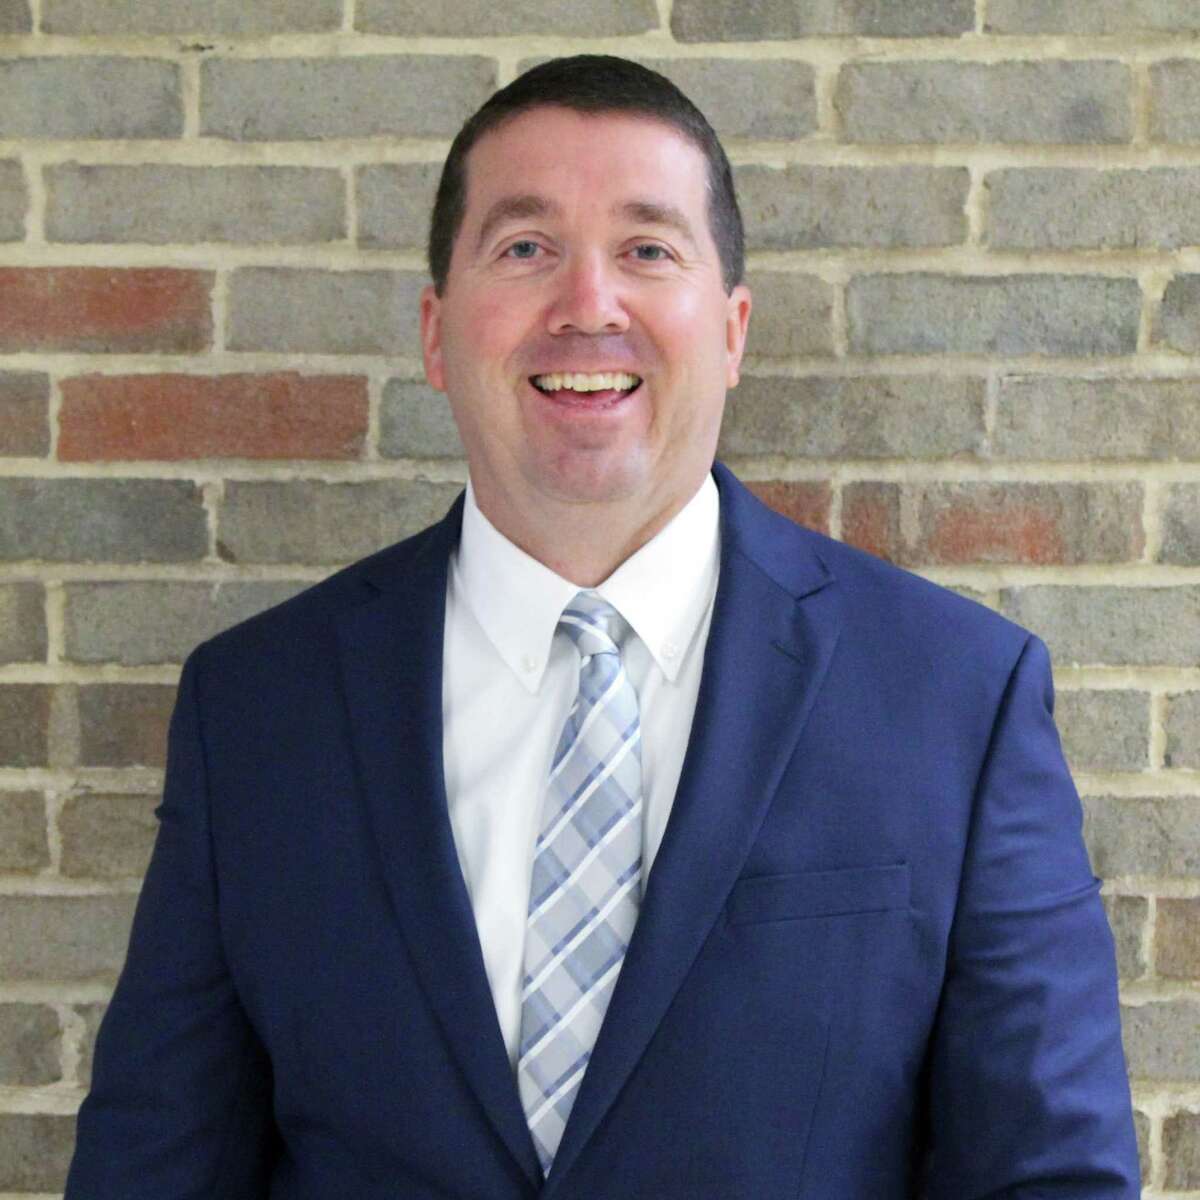 Mark Weatherly, executive director of curriculum and instruction for Montgomery ISD, will be filling the role of interim principal at Montgomery High School until a permanent choice is made. The district started the search for a new principal as soon as Dr. Andria Schur gave her notice in early March.